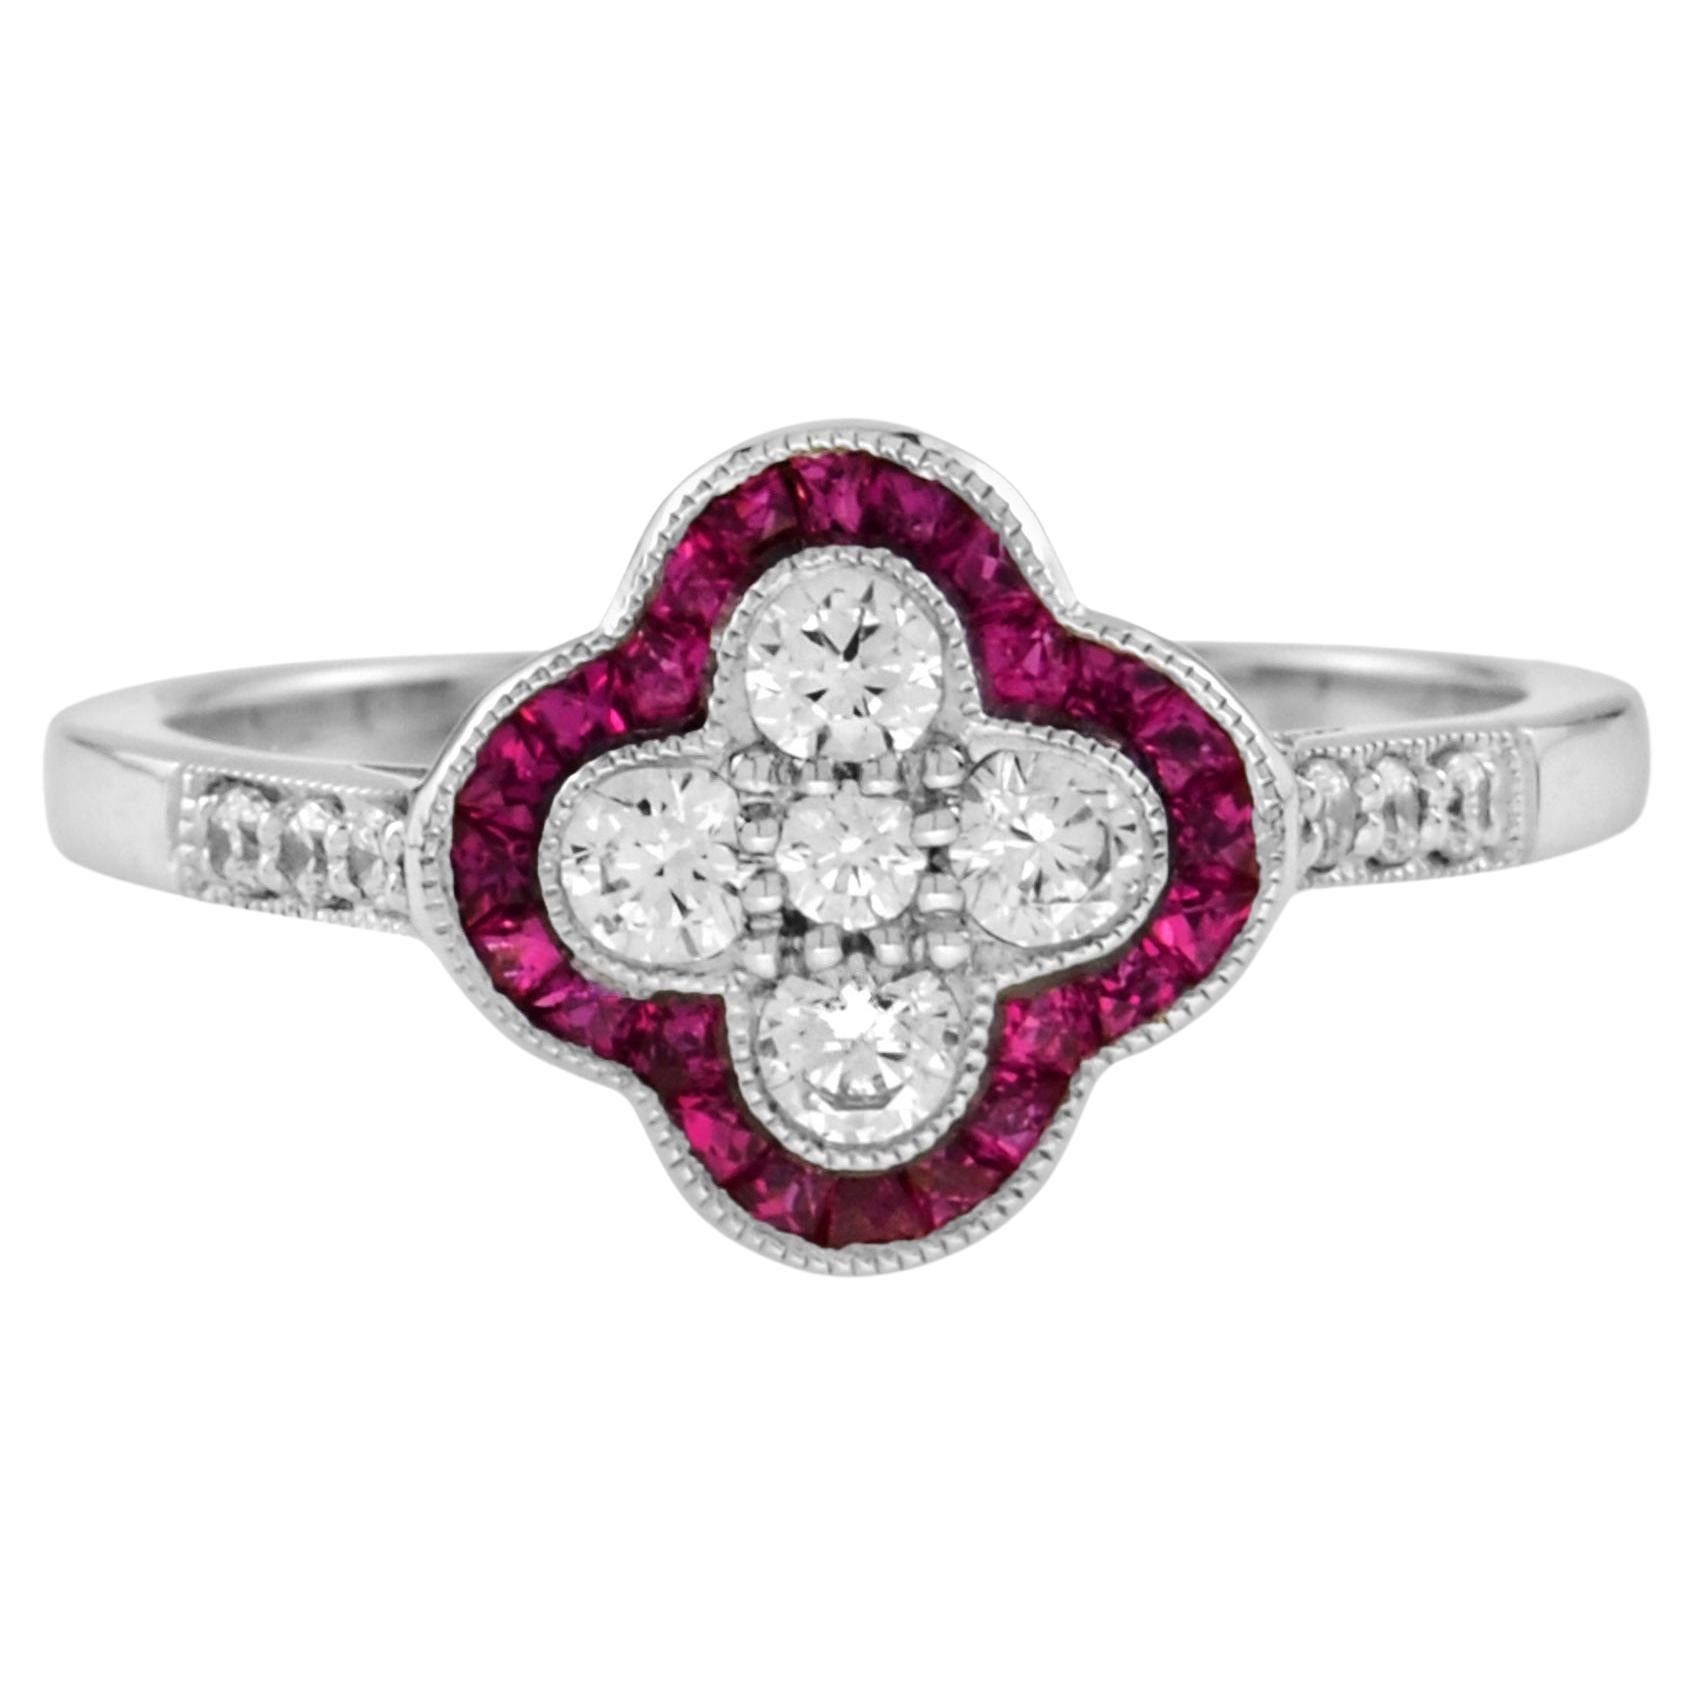 Diamond and Ruby Art Deco Style Floral Cluster Ring in 18K White Gold